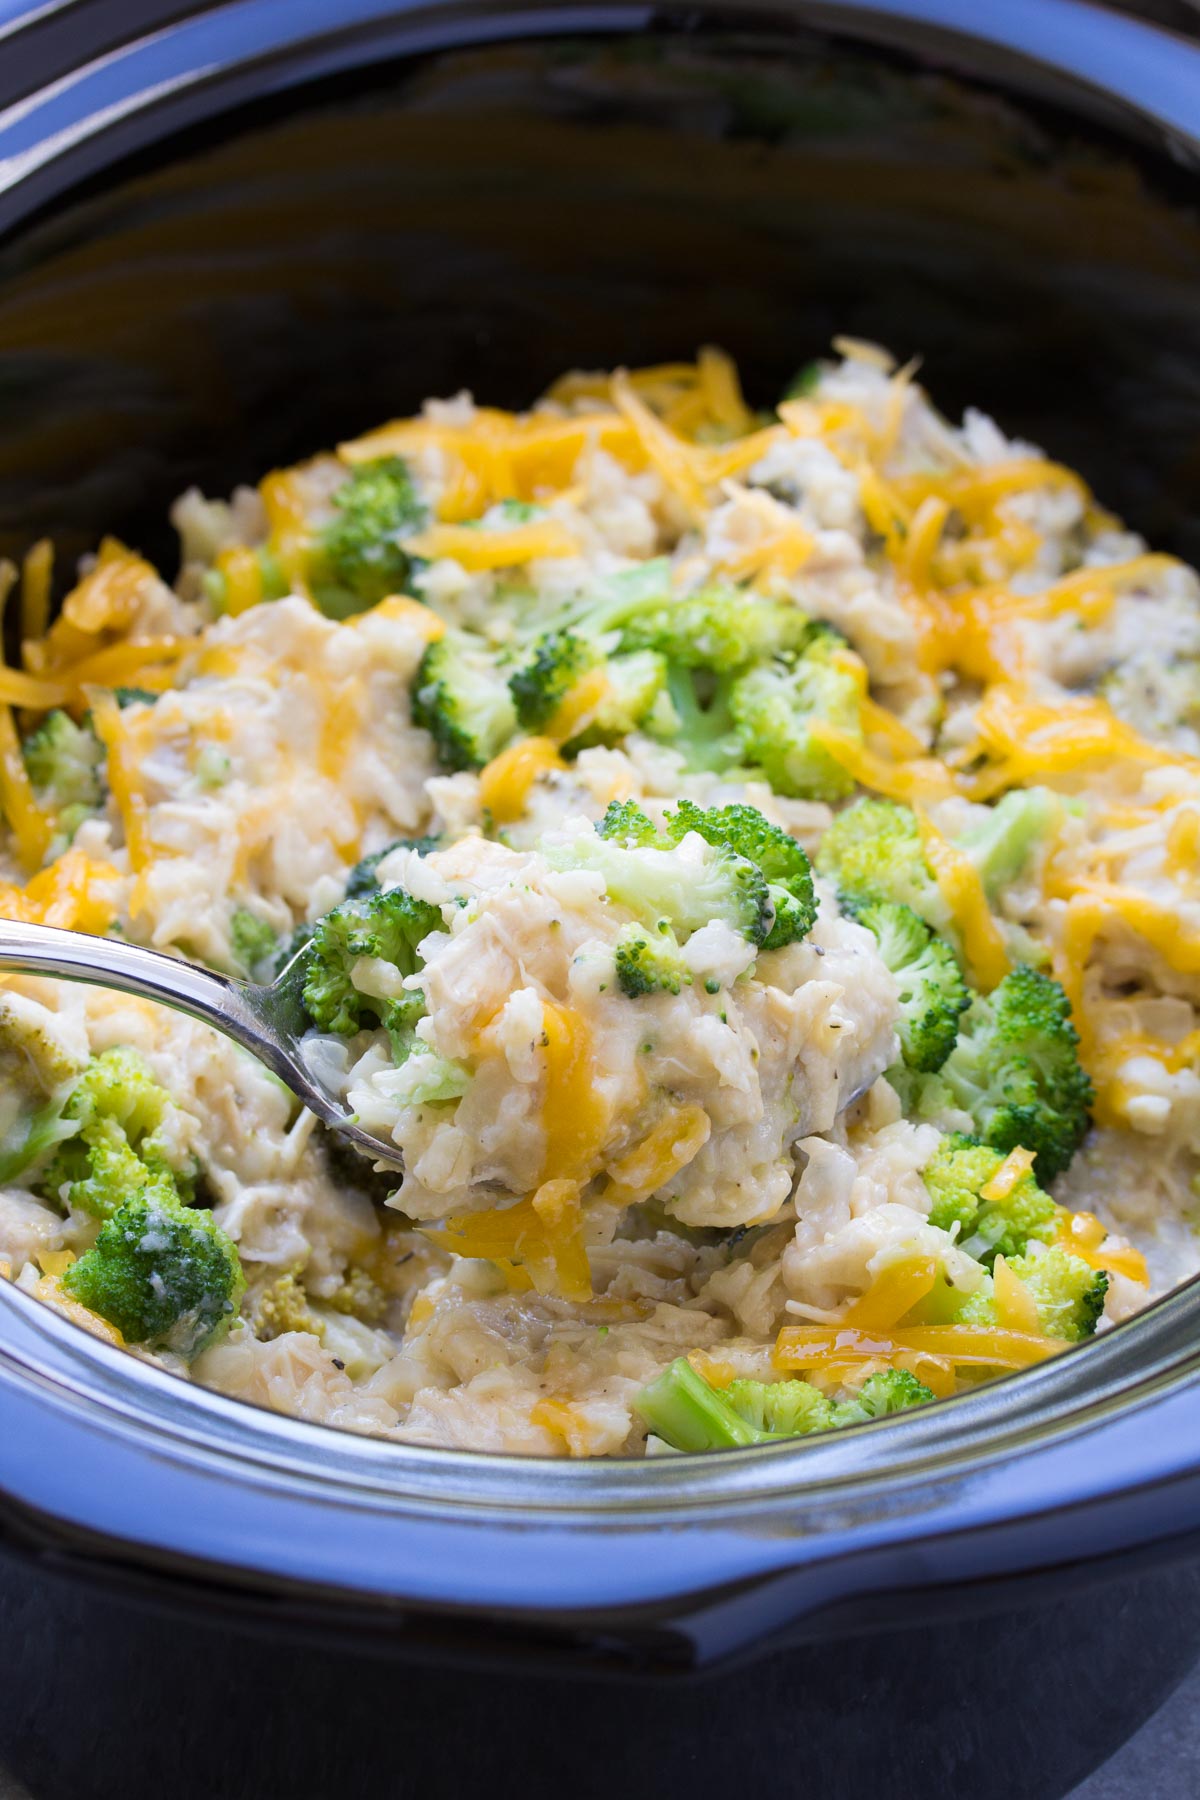 Slow Cooker Chicken Broccoli And Rice Casserole,Memorial Day American Flag Coloring Page